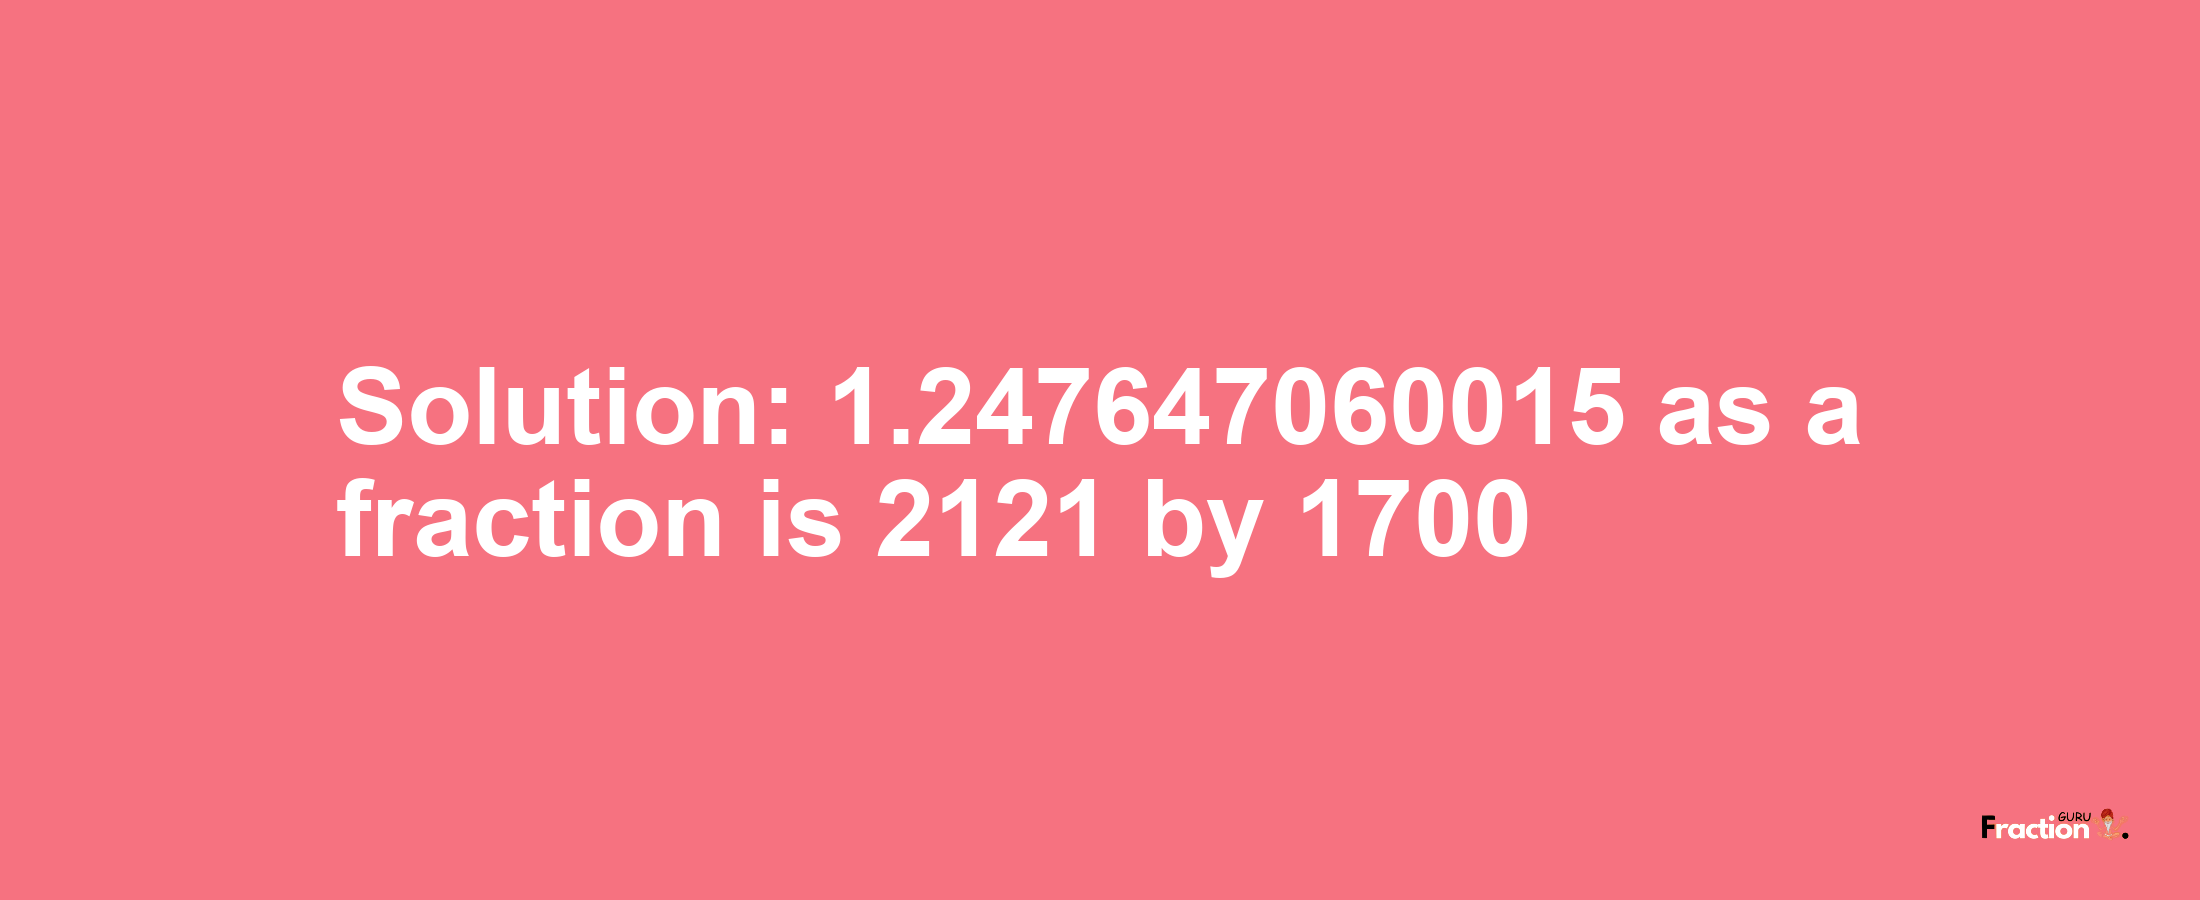 Solution:1.247647060015 as a fraction is 2121/1700